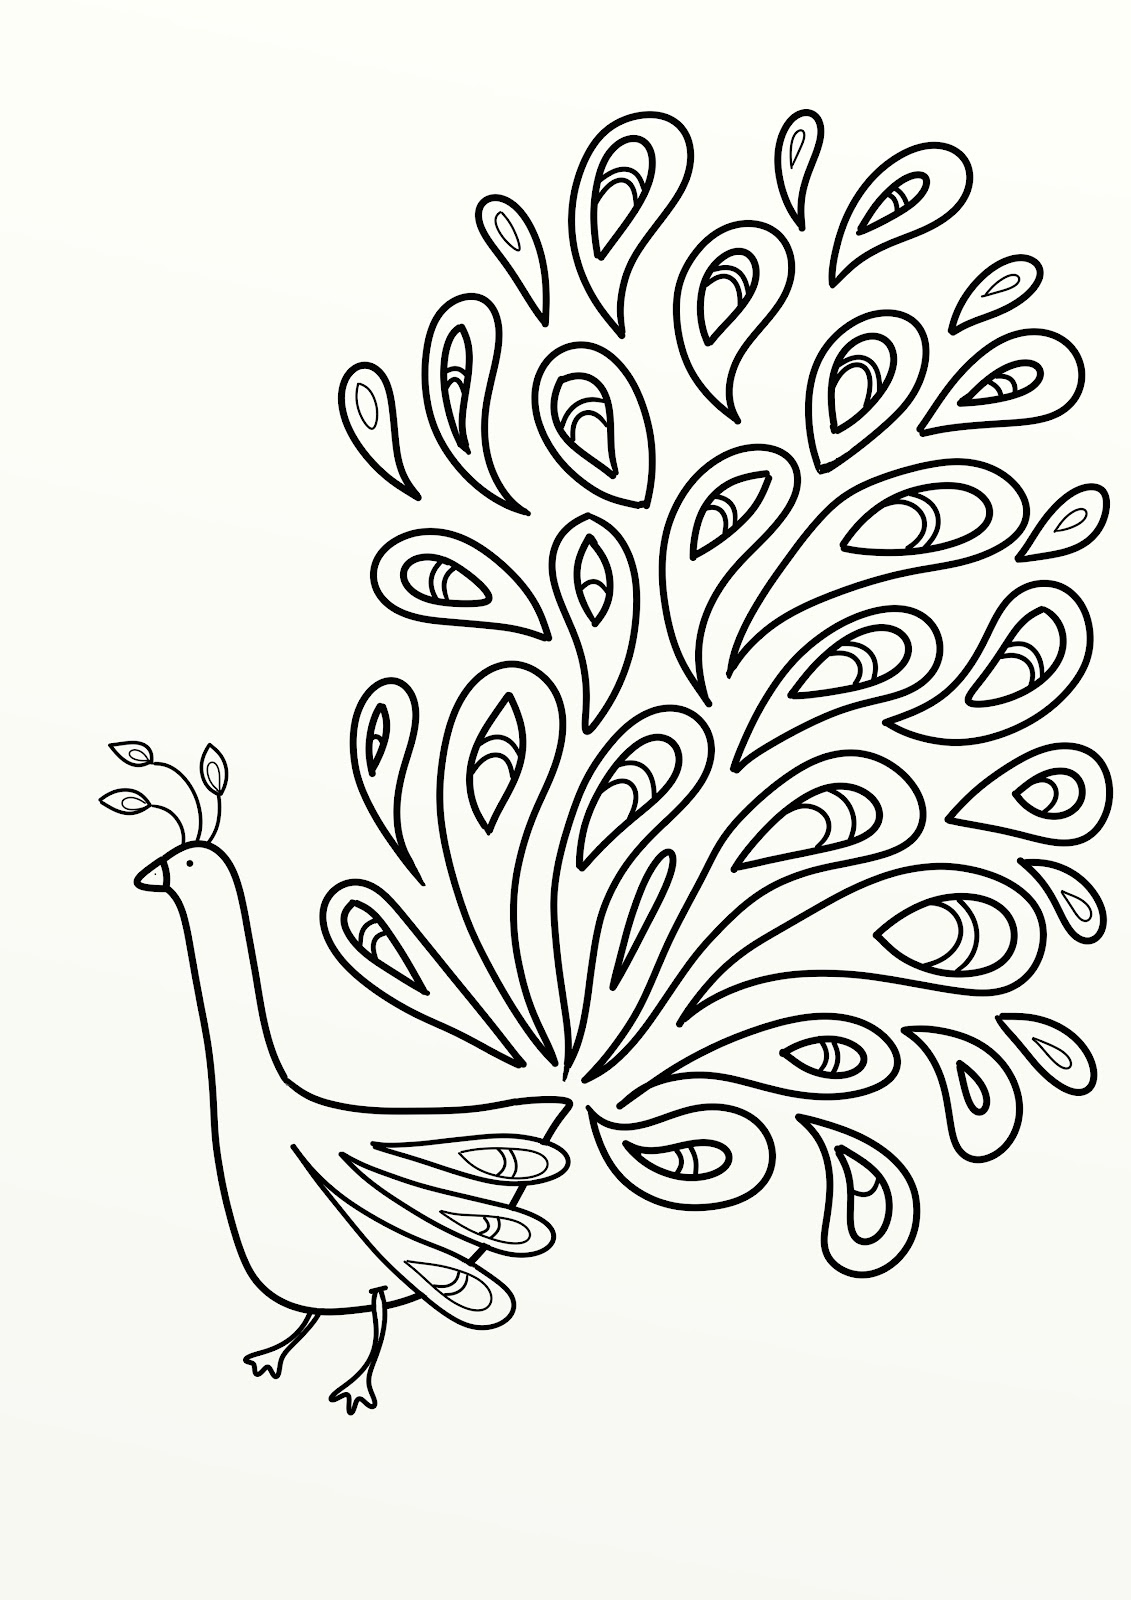 peacock-outline-drawing-at-getdrawings-free-download